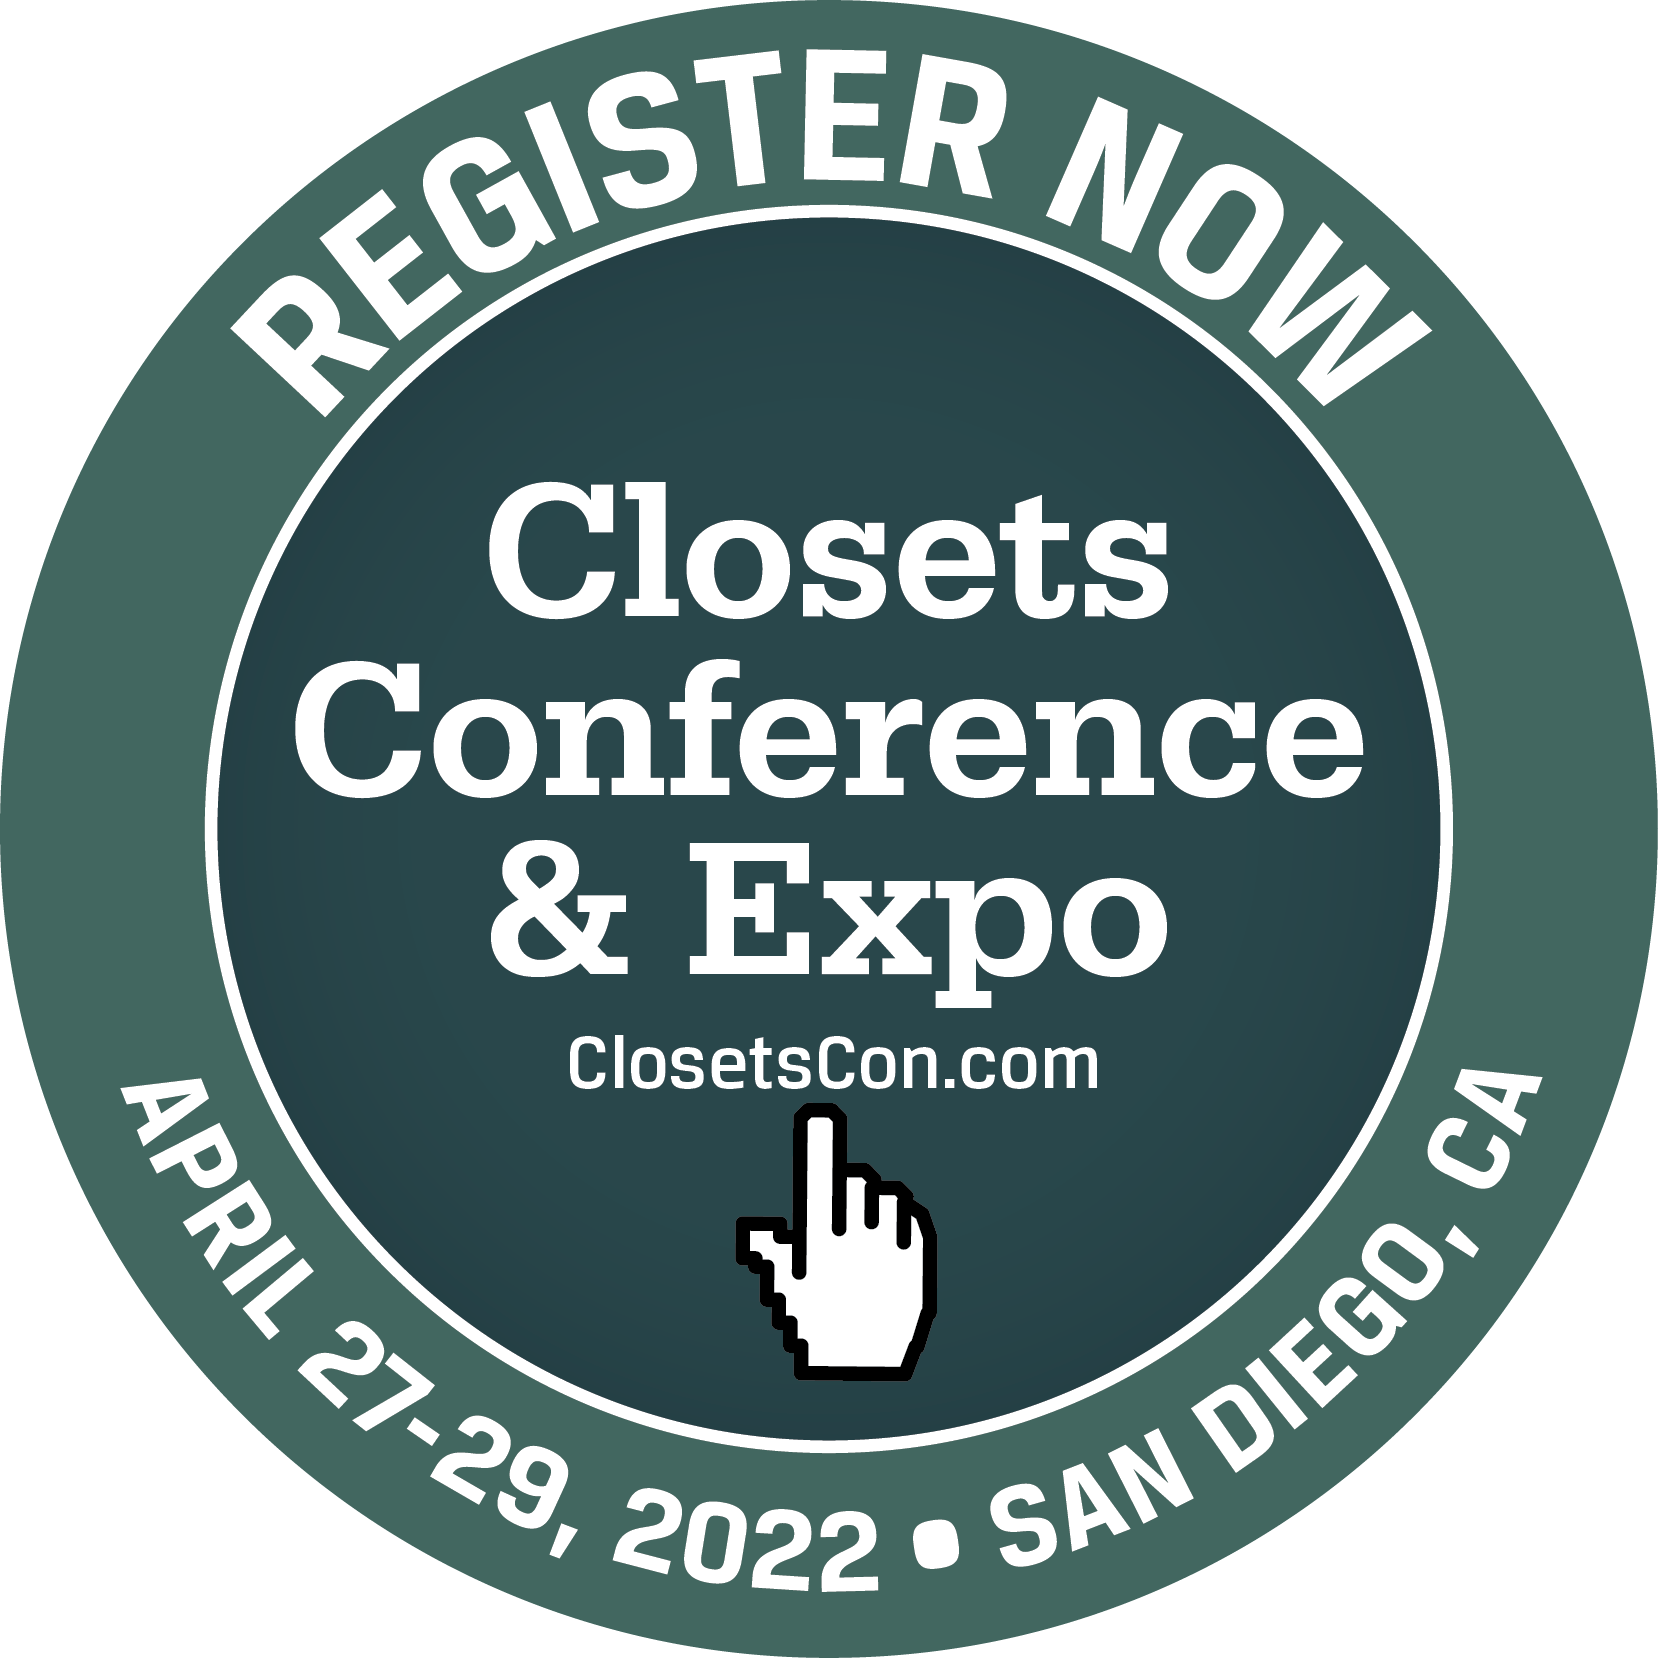 2022 Closets Conference & Expo registration